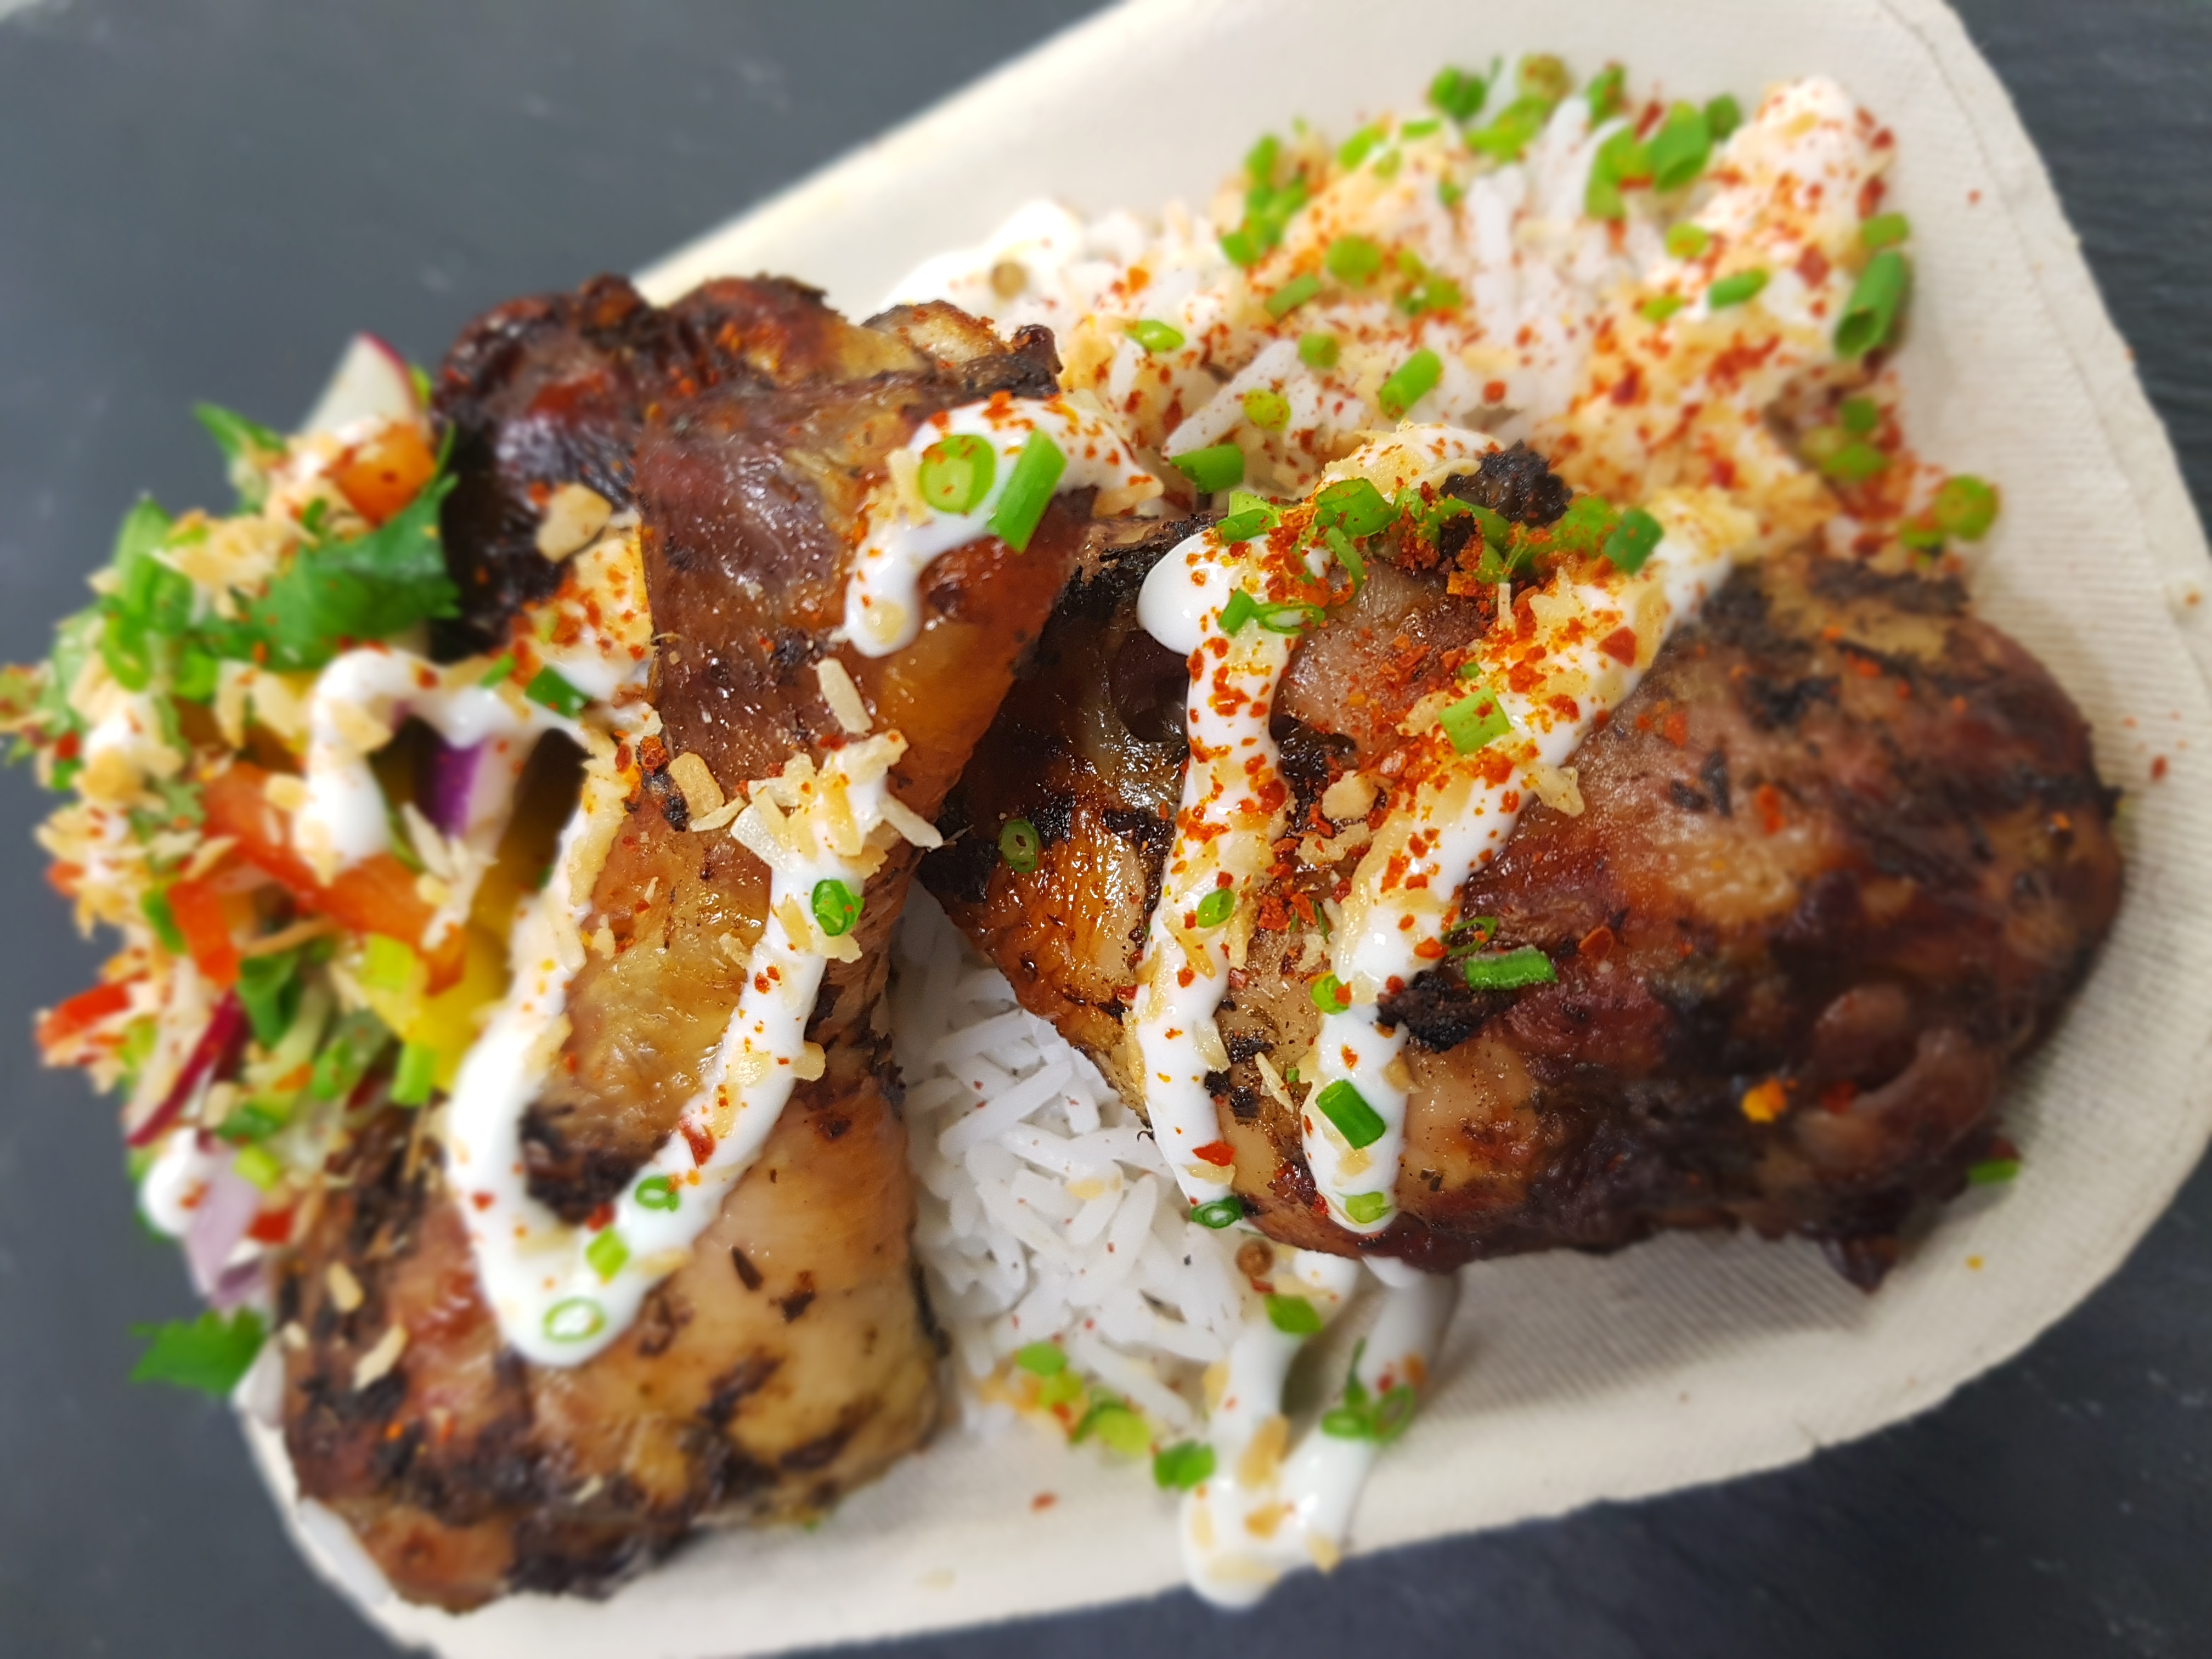 Island Chicken to be served at the WindsorEats Street Food Fare in Windsor, Ontario.